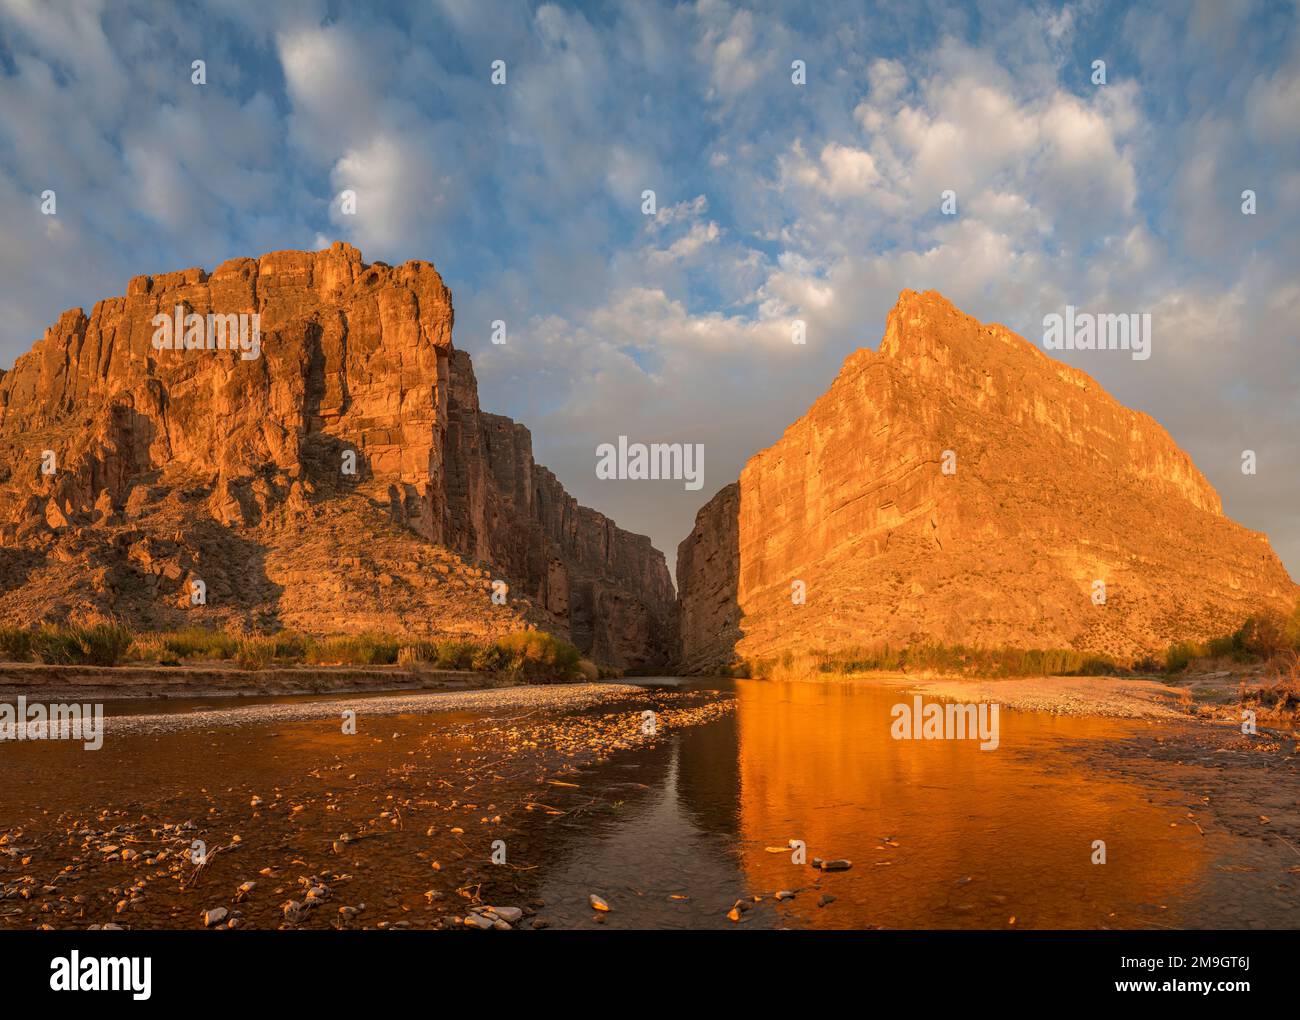 Landscape with cliffs in Santa Elena Canyon and Rio Grande River, Big Bend National Park, Chihuahuan Desert, Texas, USA Stock Photo